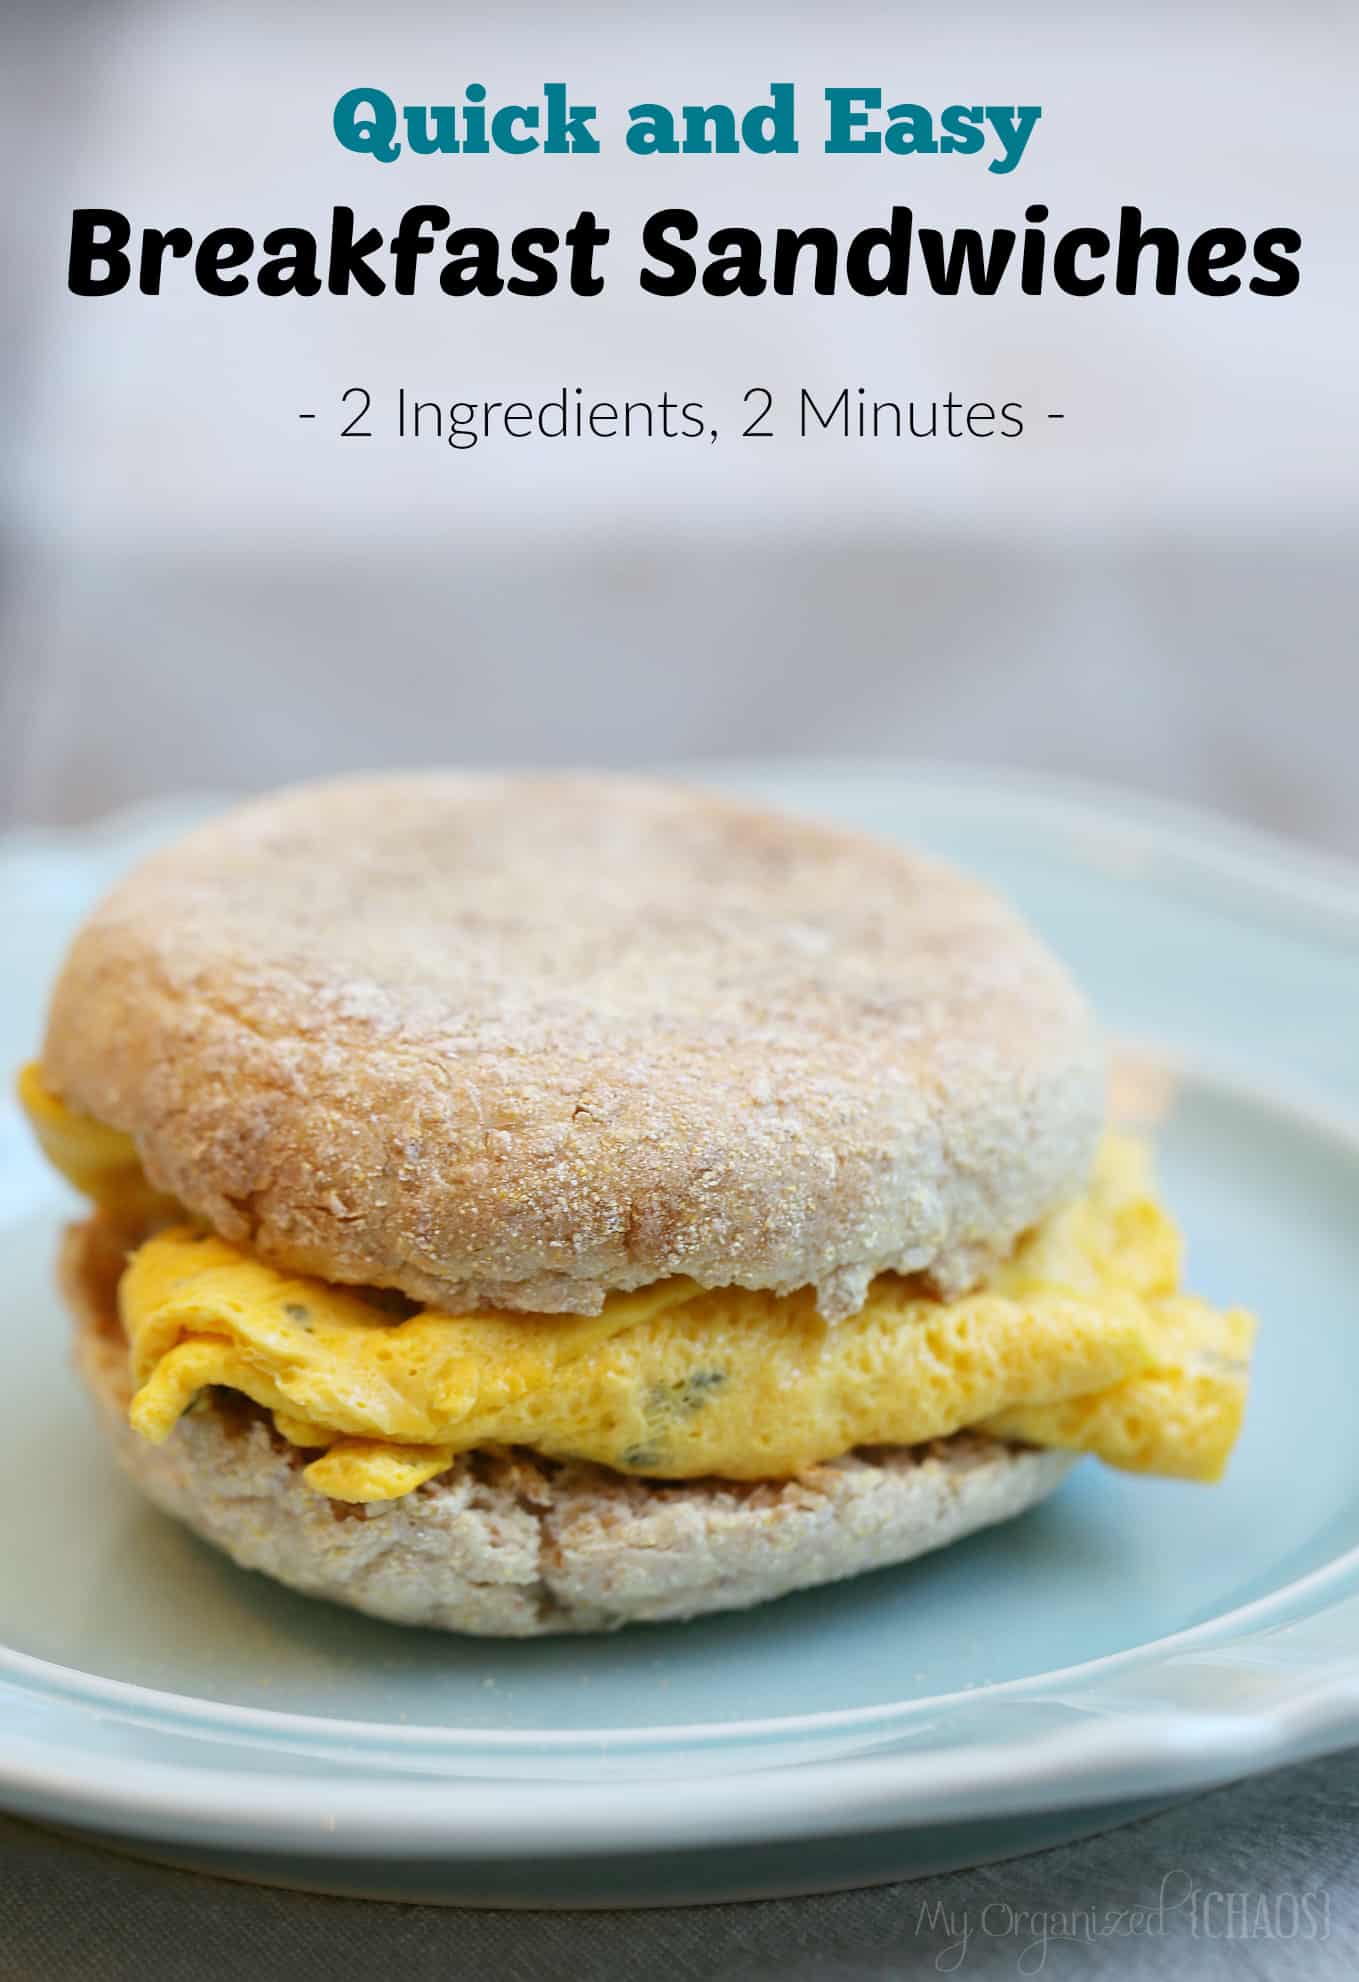 Quick and Easy Breakfast Sandwiches